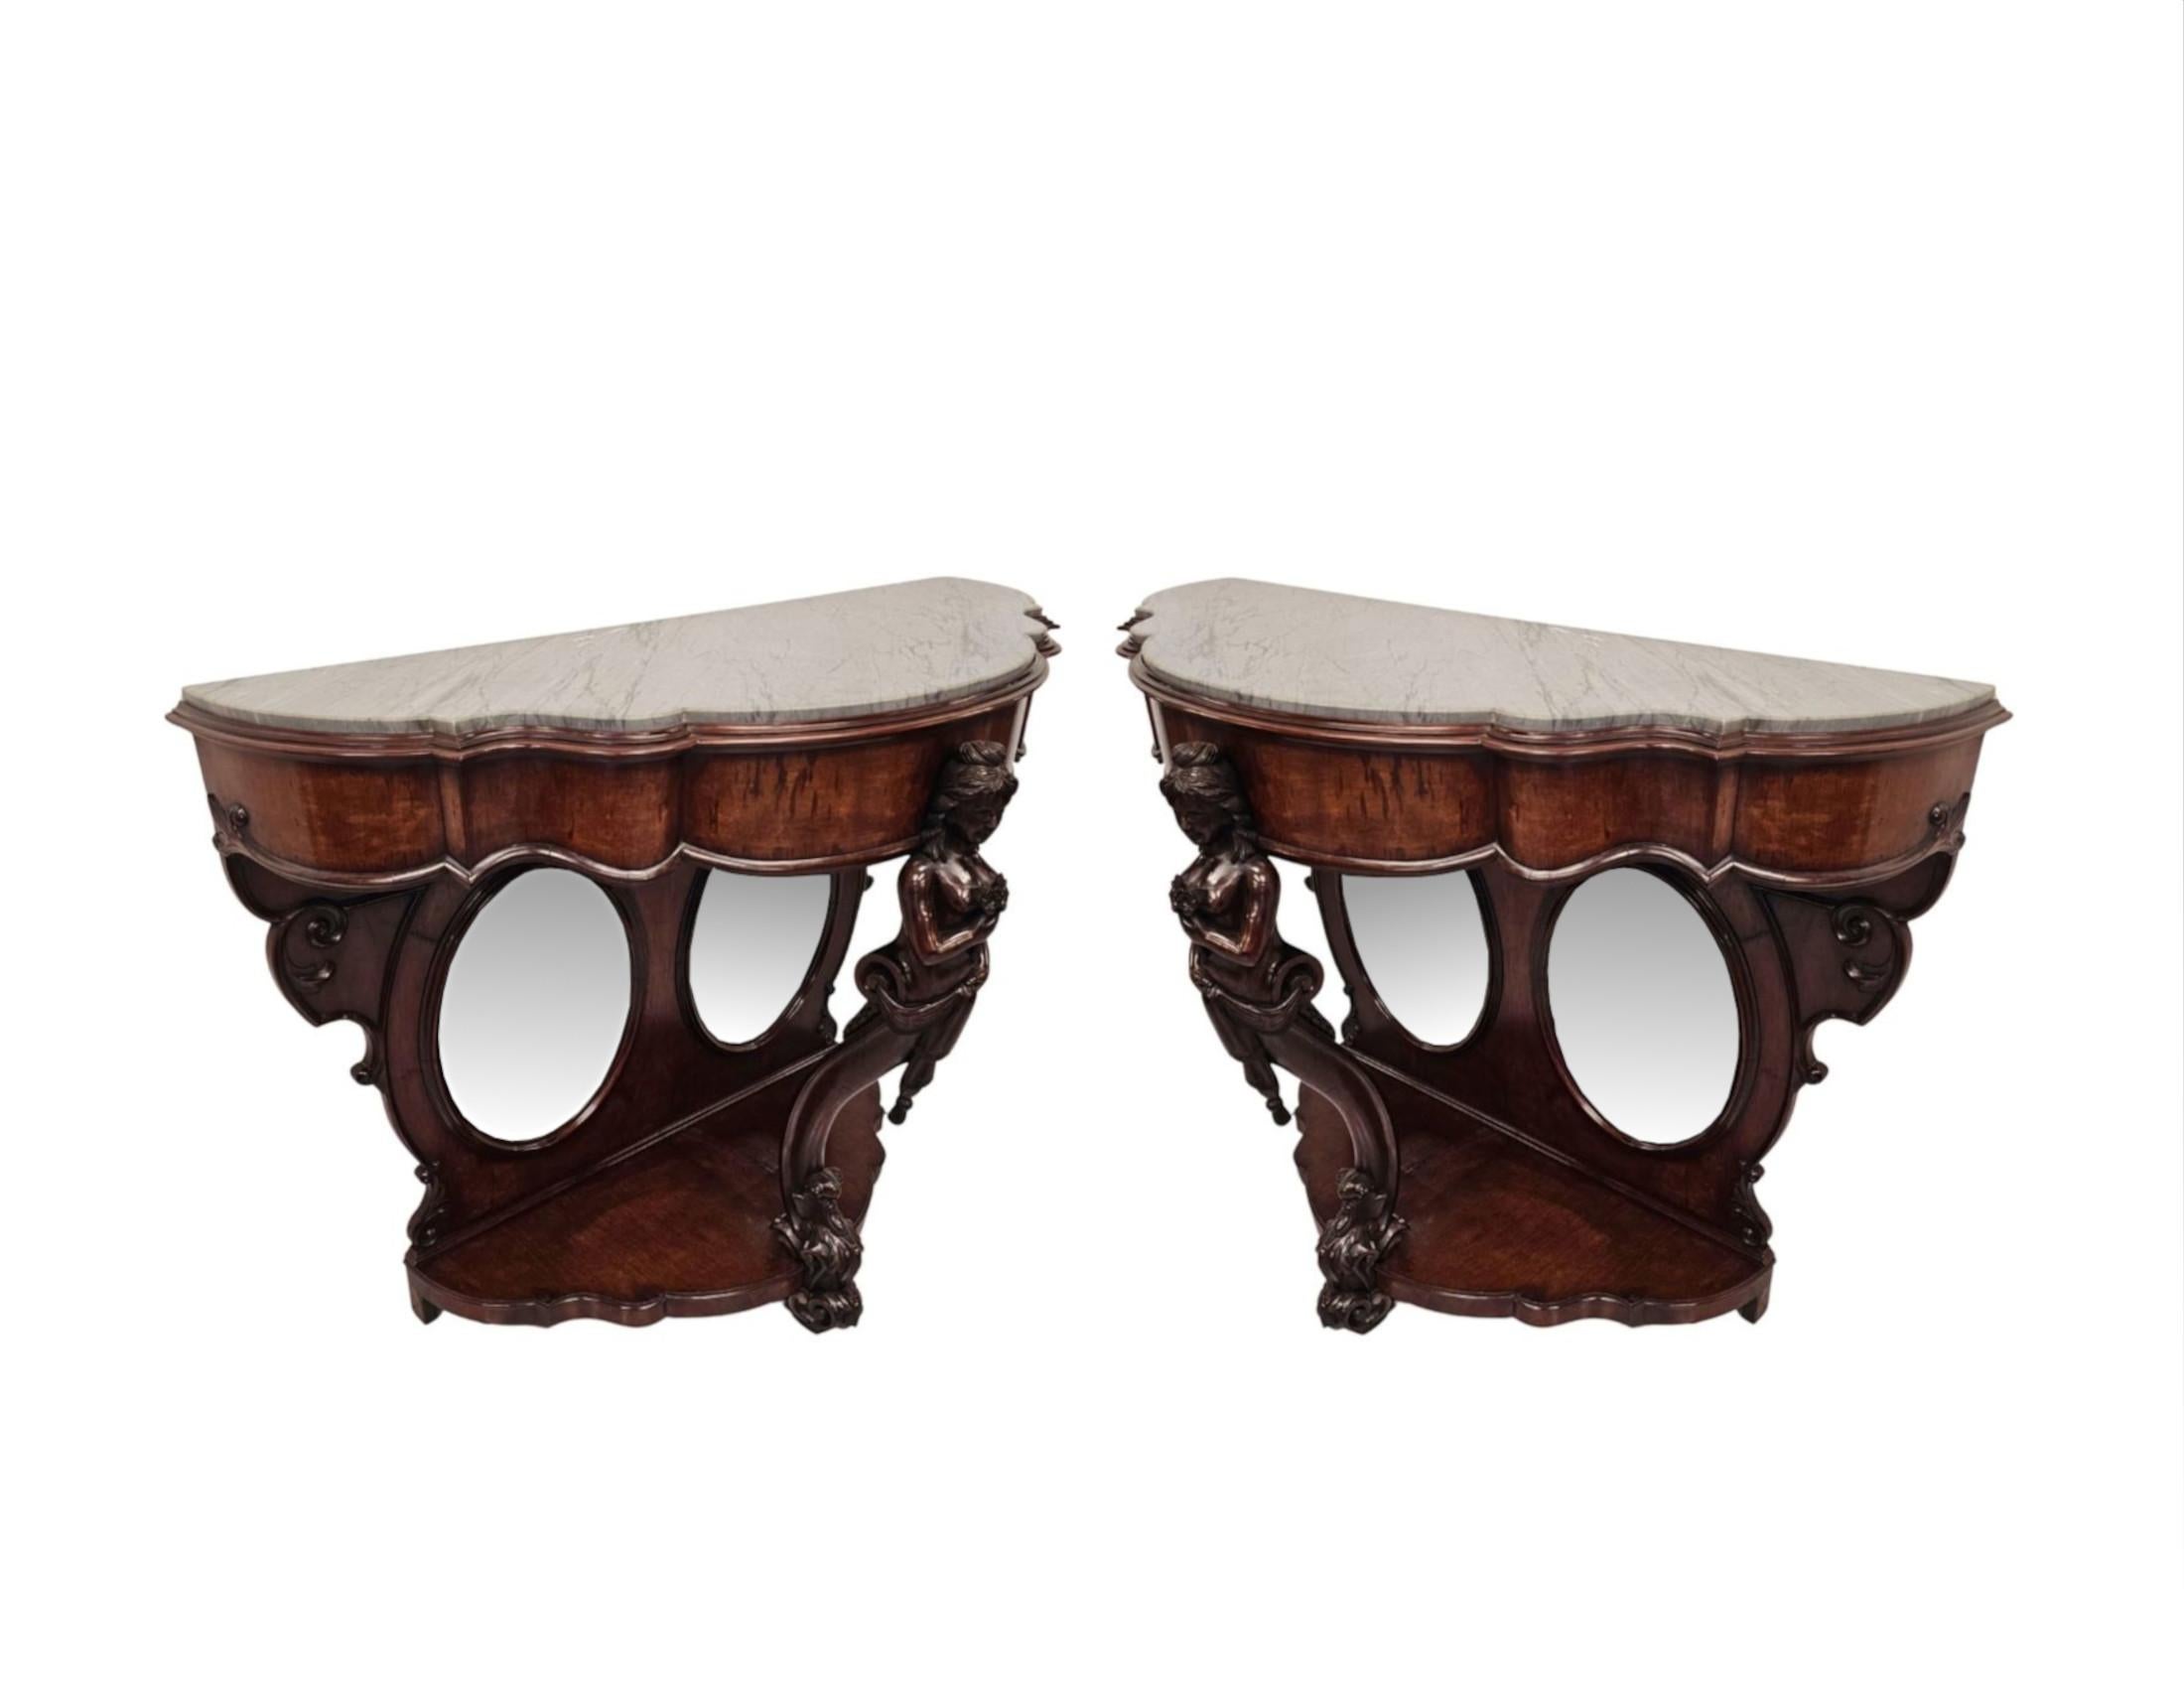 A very rare pair of finely figured mahogany marble top Country House console tables.  This impressive pair are of exceptional quality, tall proportions and finely hand carved with rich patination and grain.  The fabulous, moulded Grigio grey